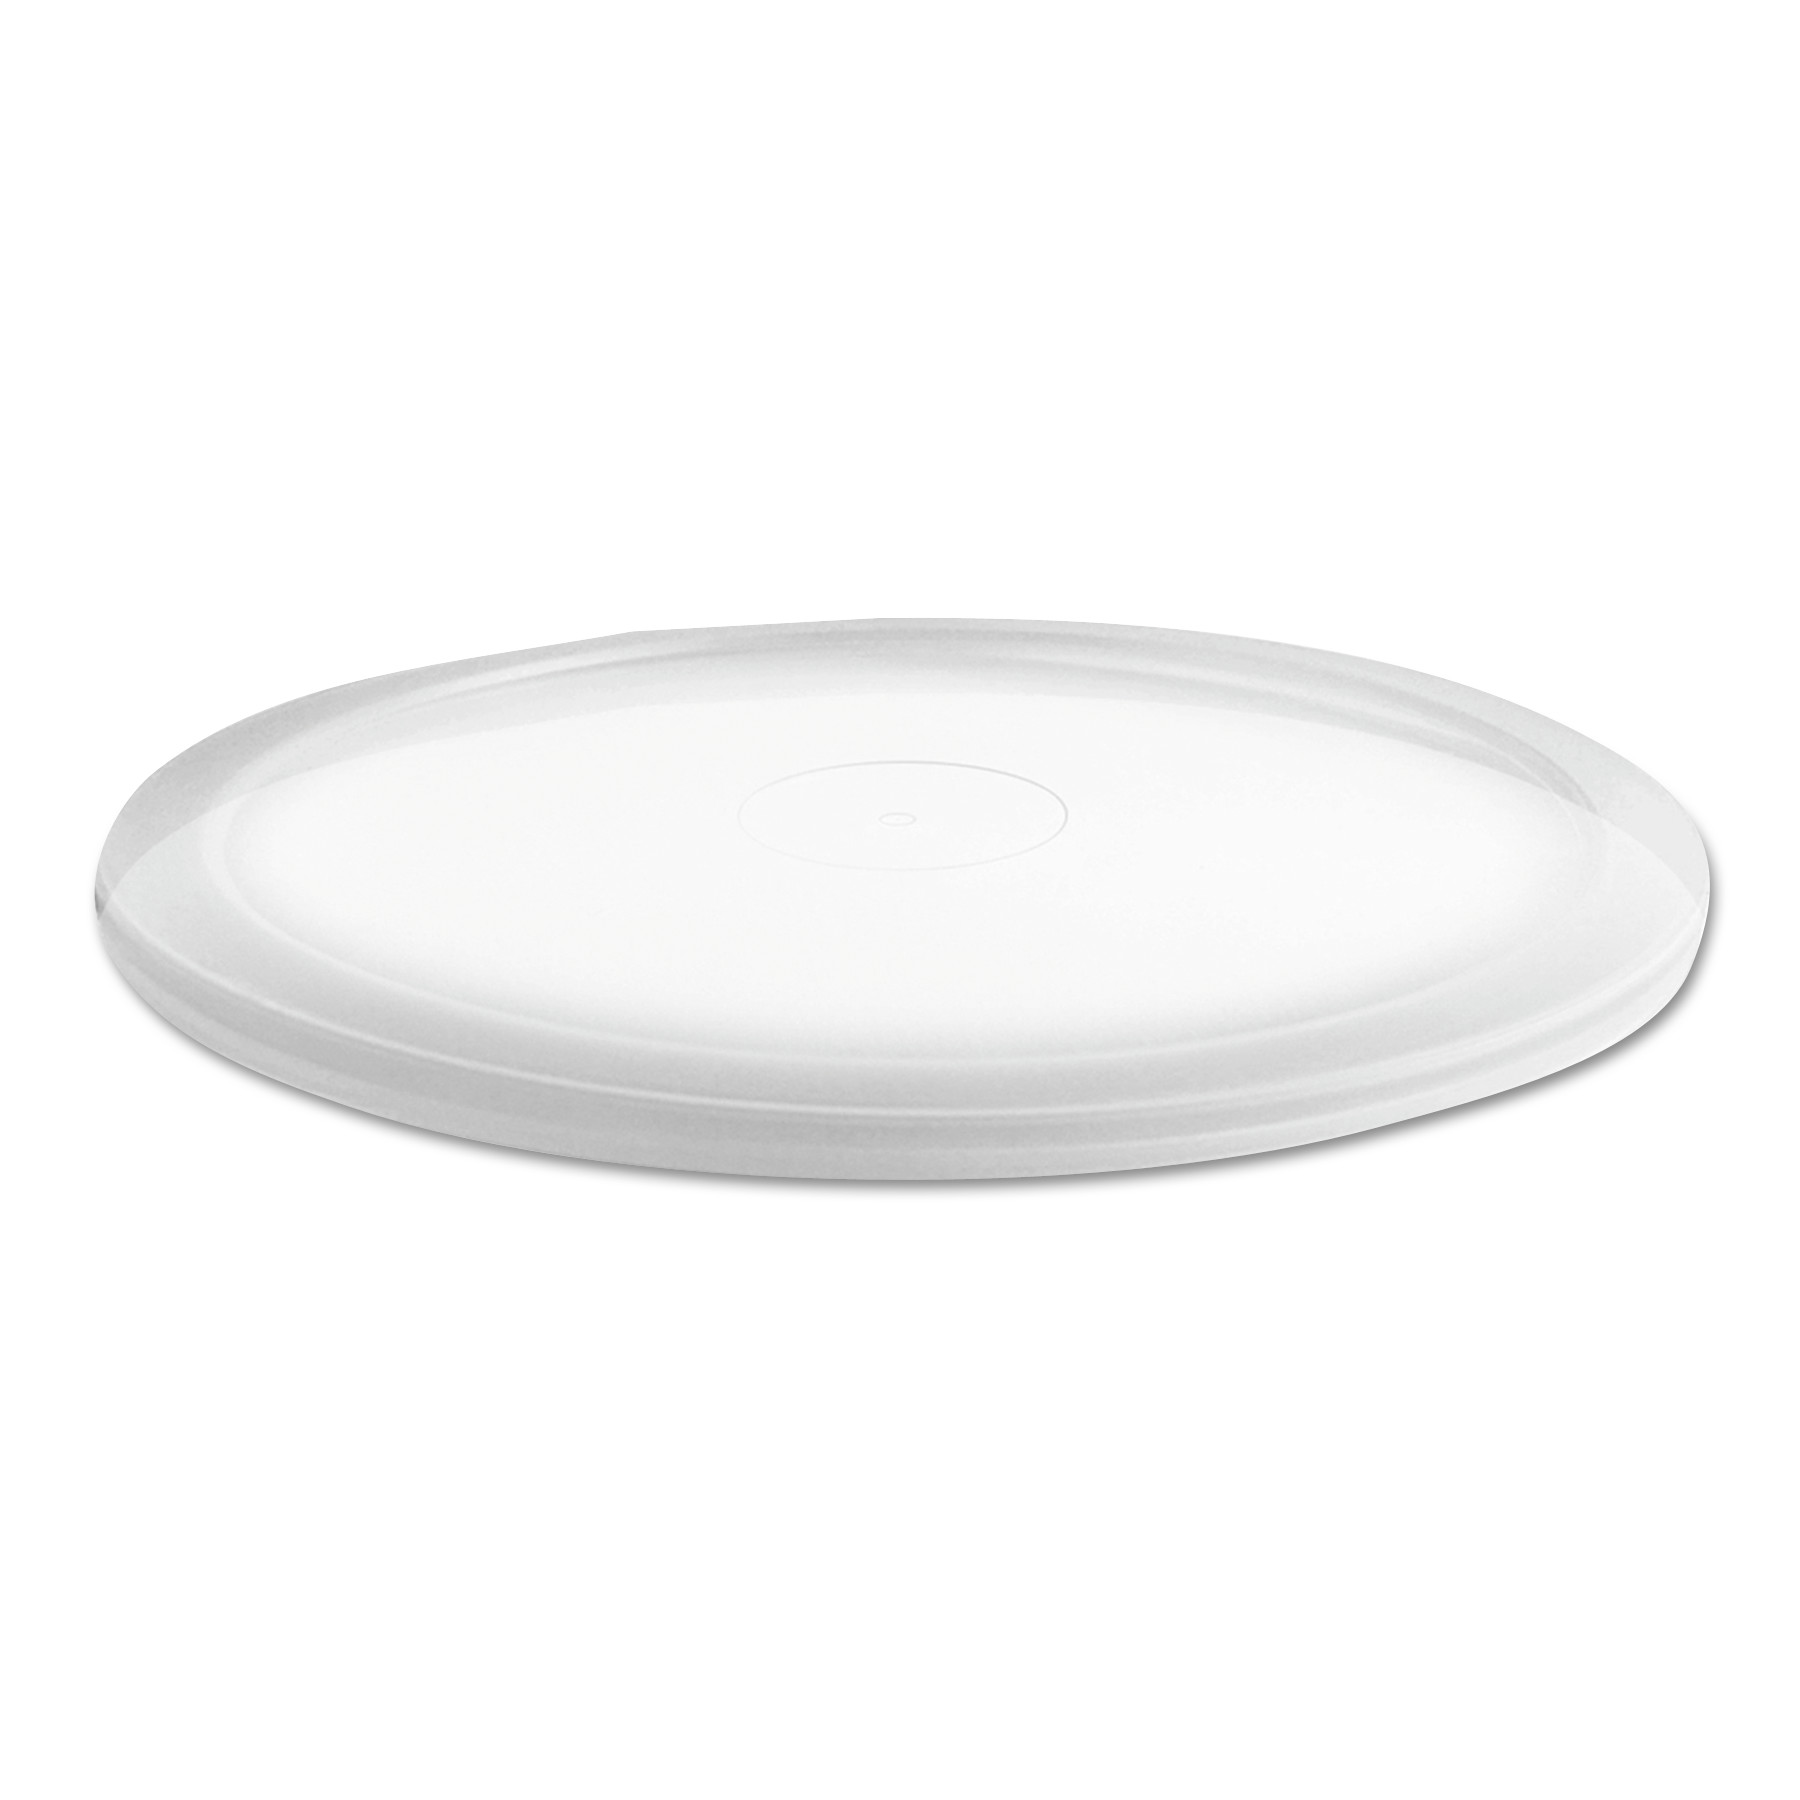  Anchor Packaging IL409C MicroLite Deli Tub Lid, Clear, Over-Cap Fit, Fits 8-32 oz Containers, 500/Carton (ANZIL409C) 